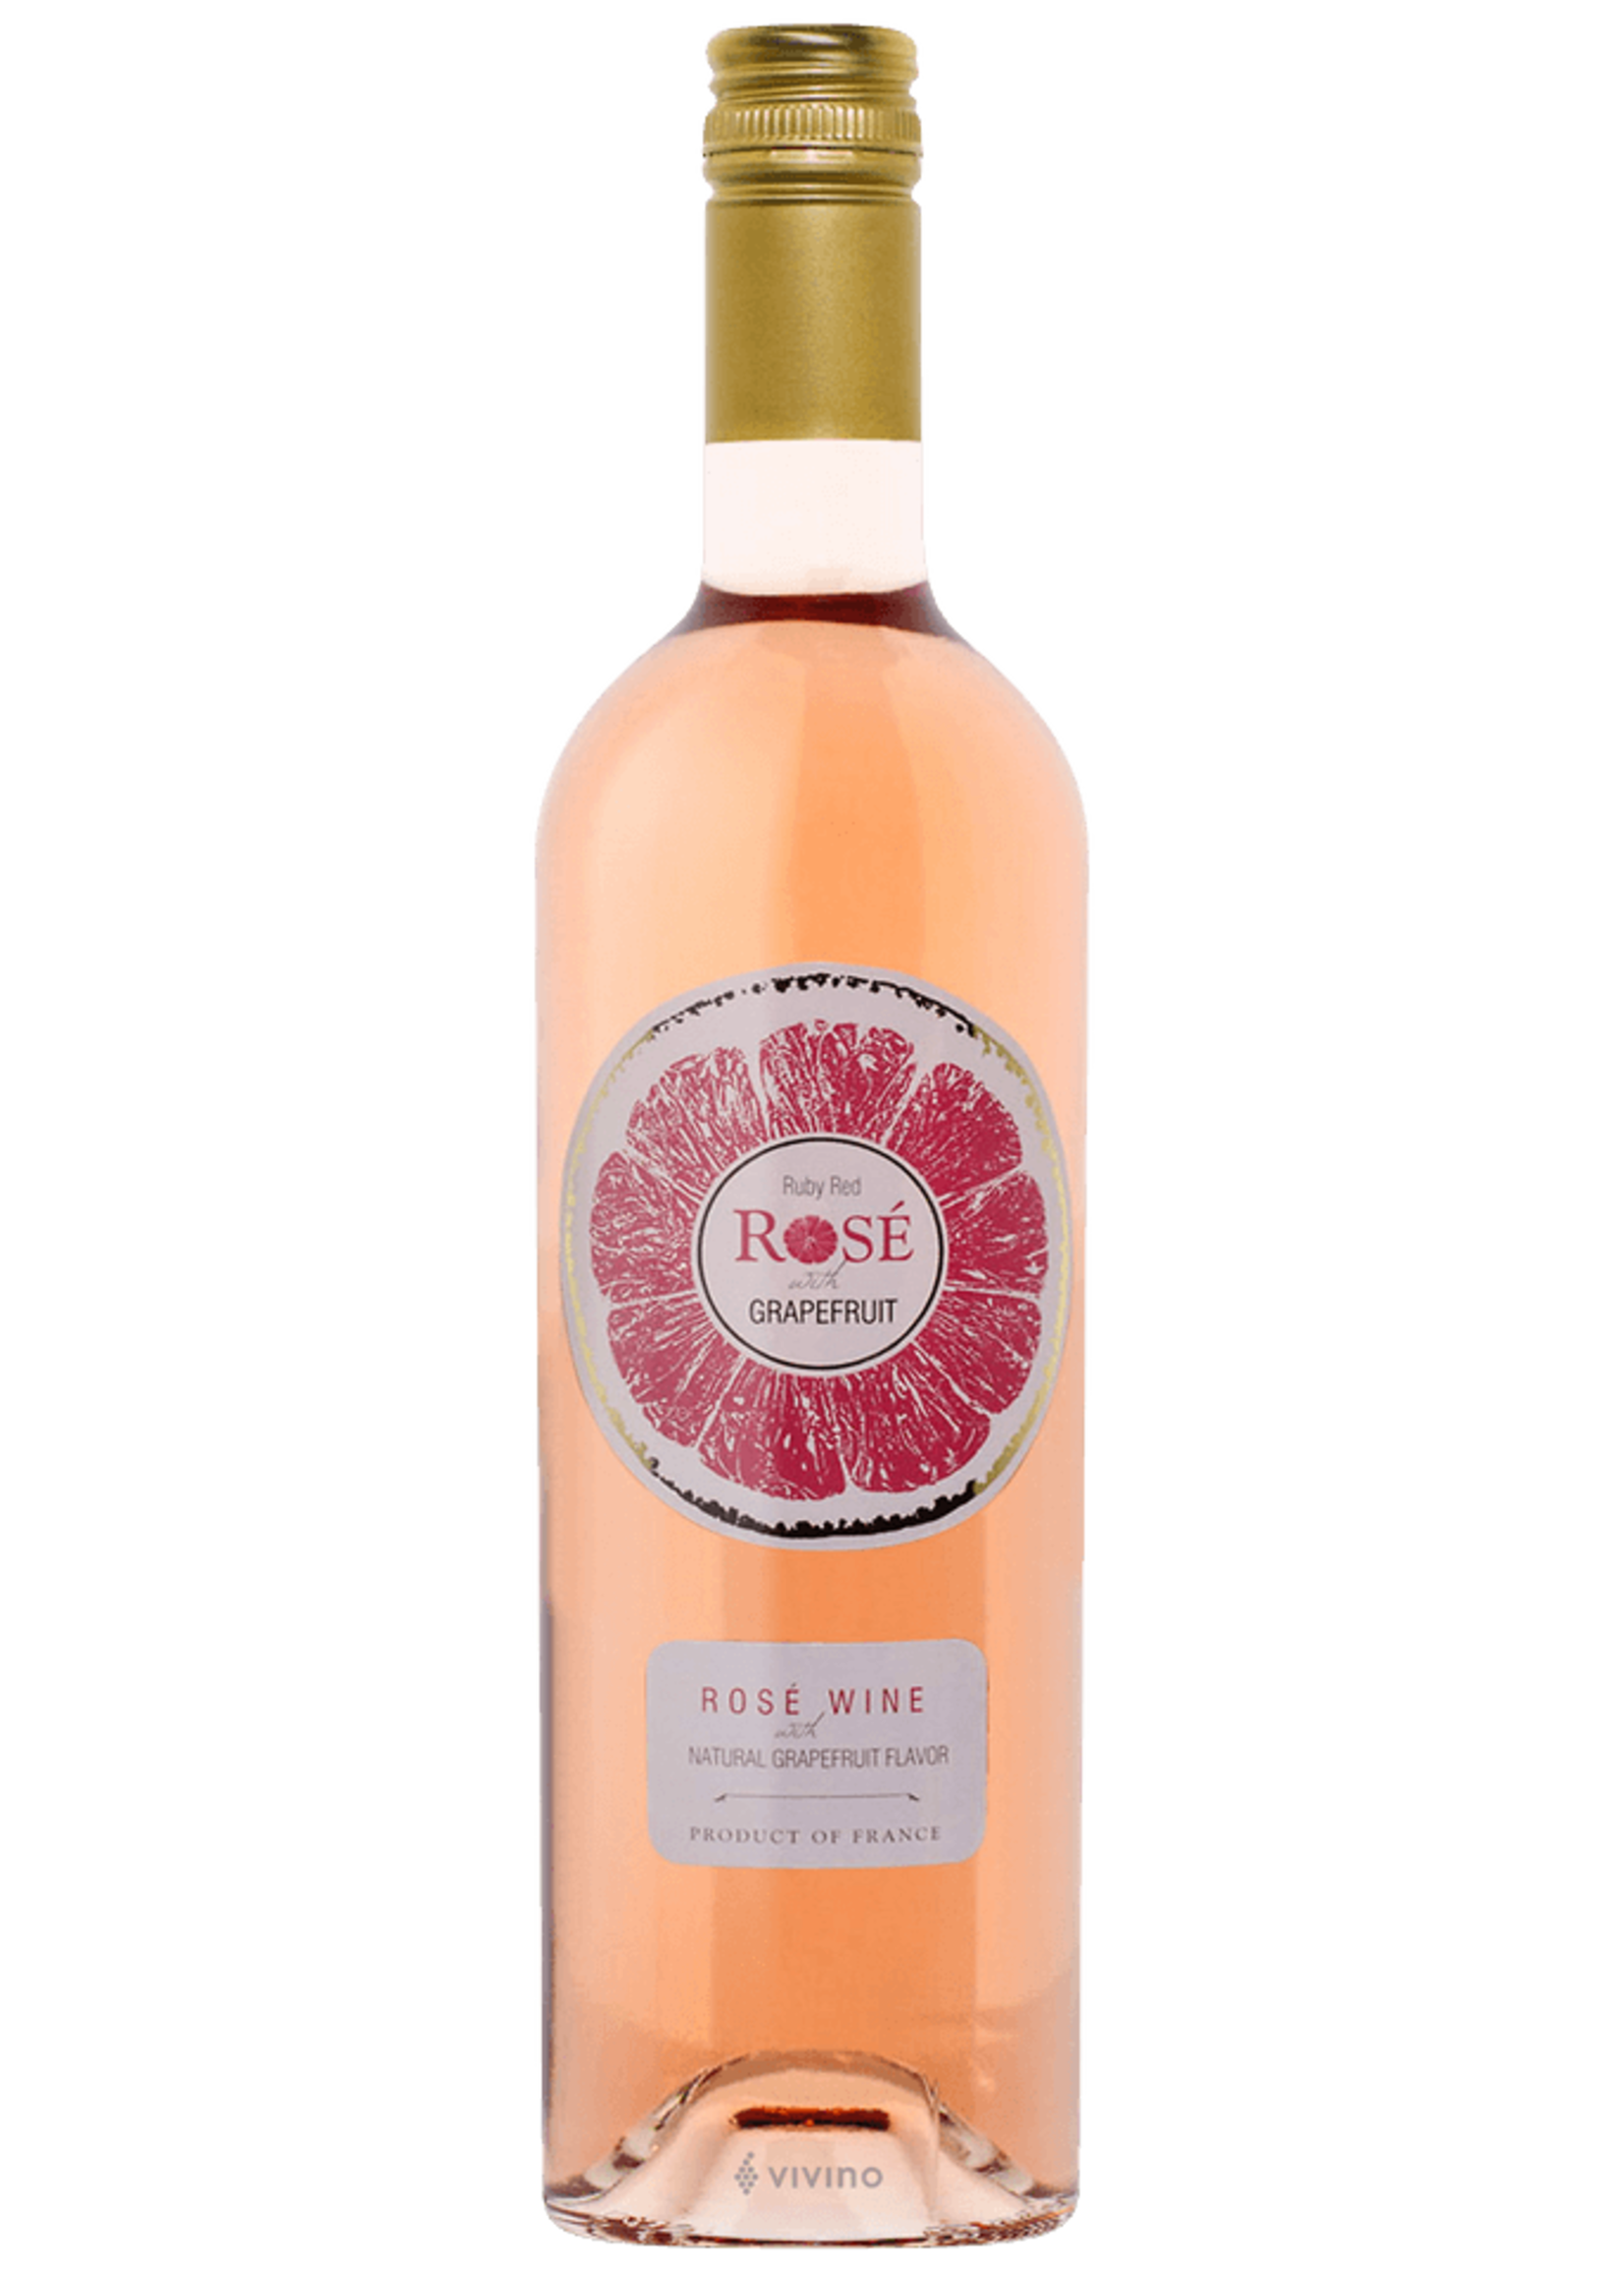 Discovering Ruby Red Rose Grapefruit Wine - MORE TIME TO TRAVEL